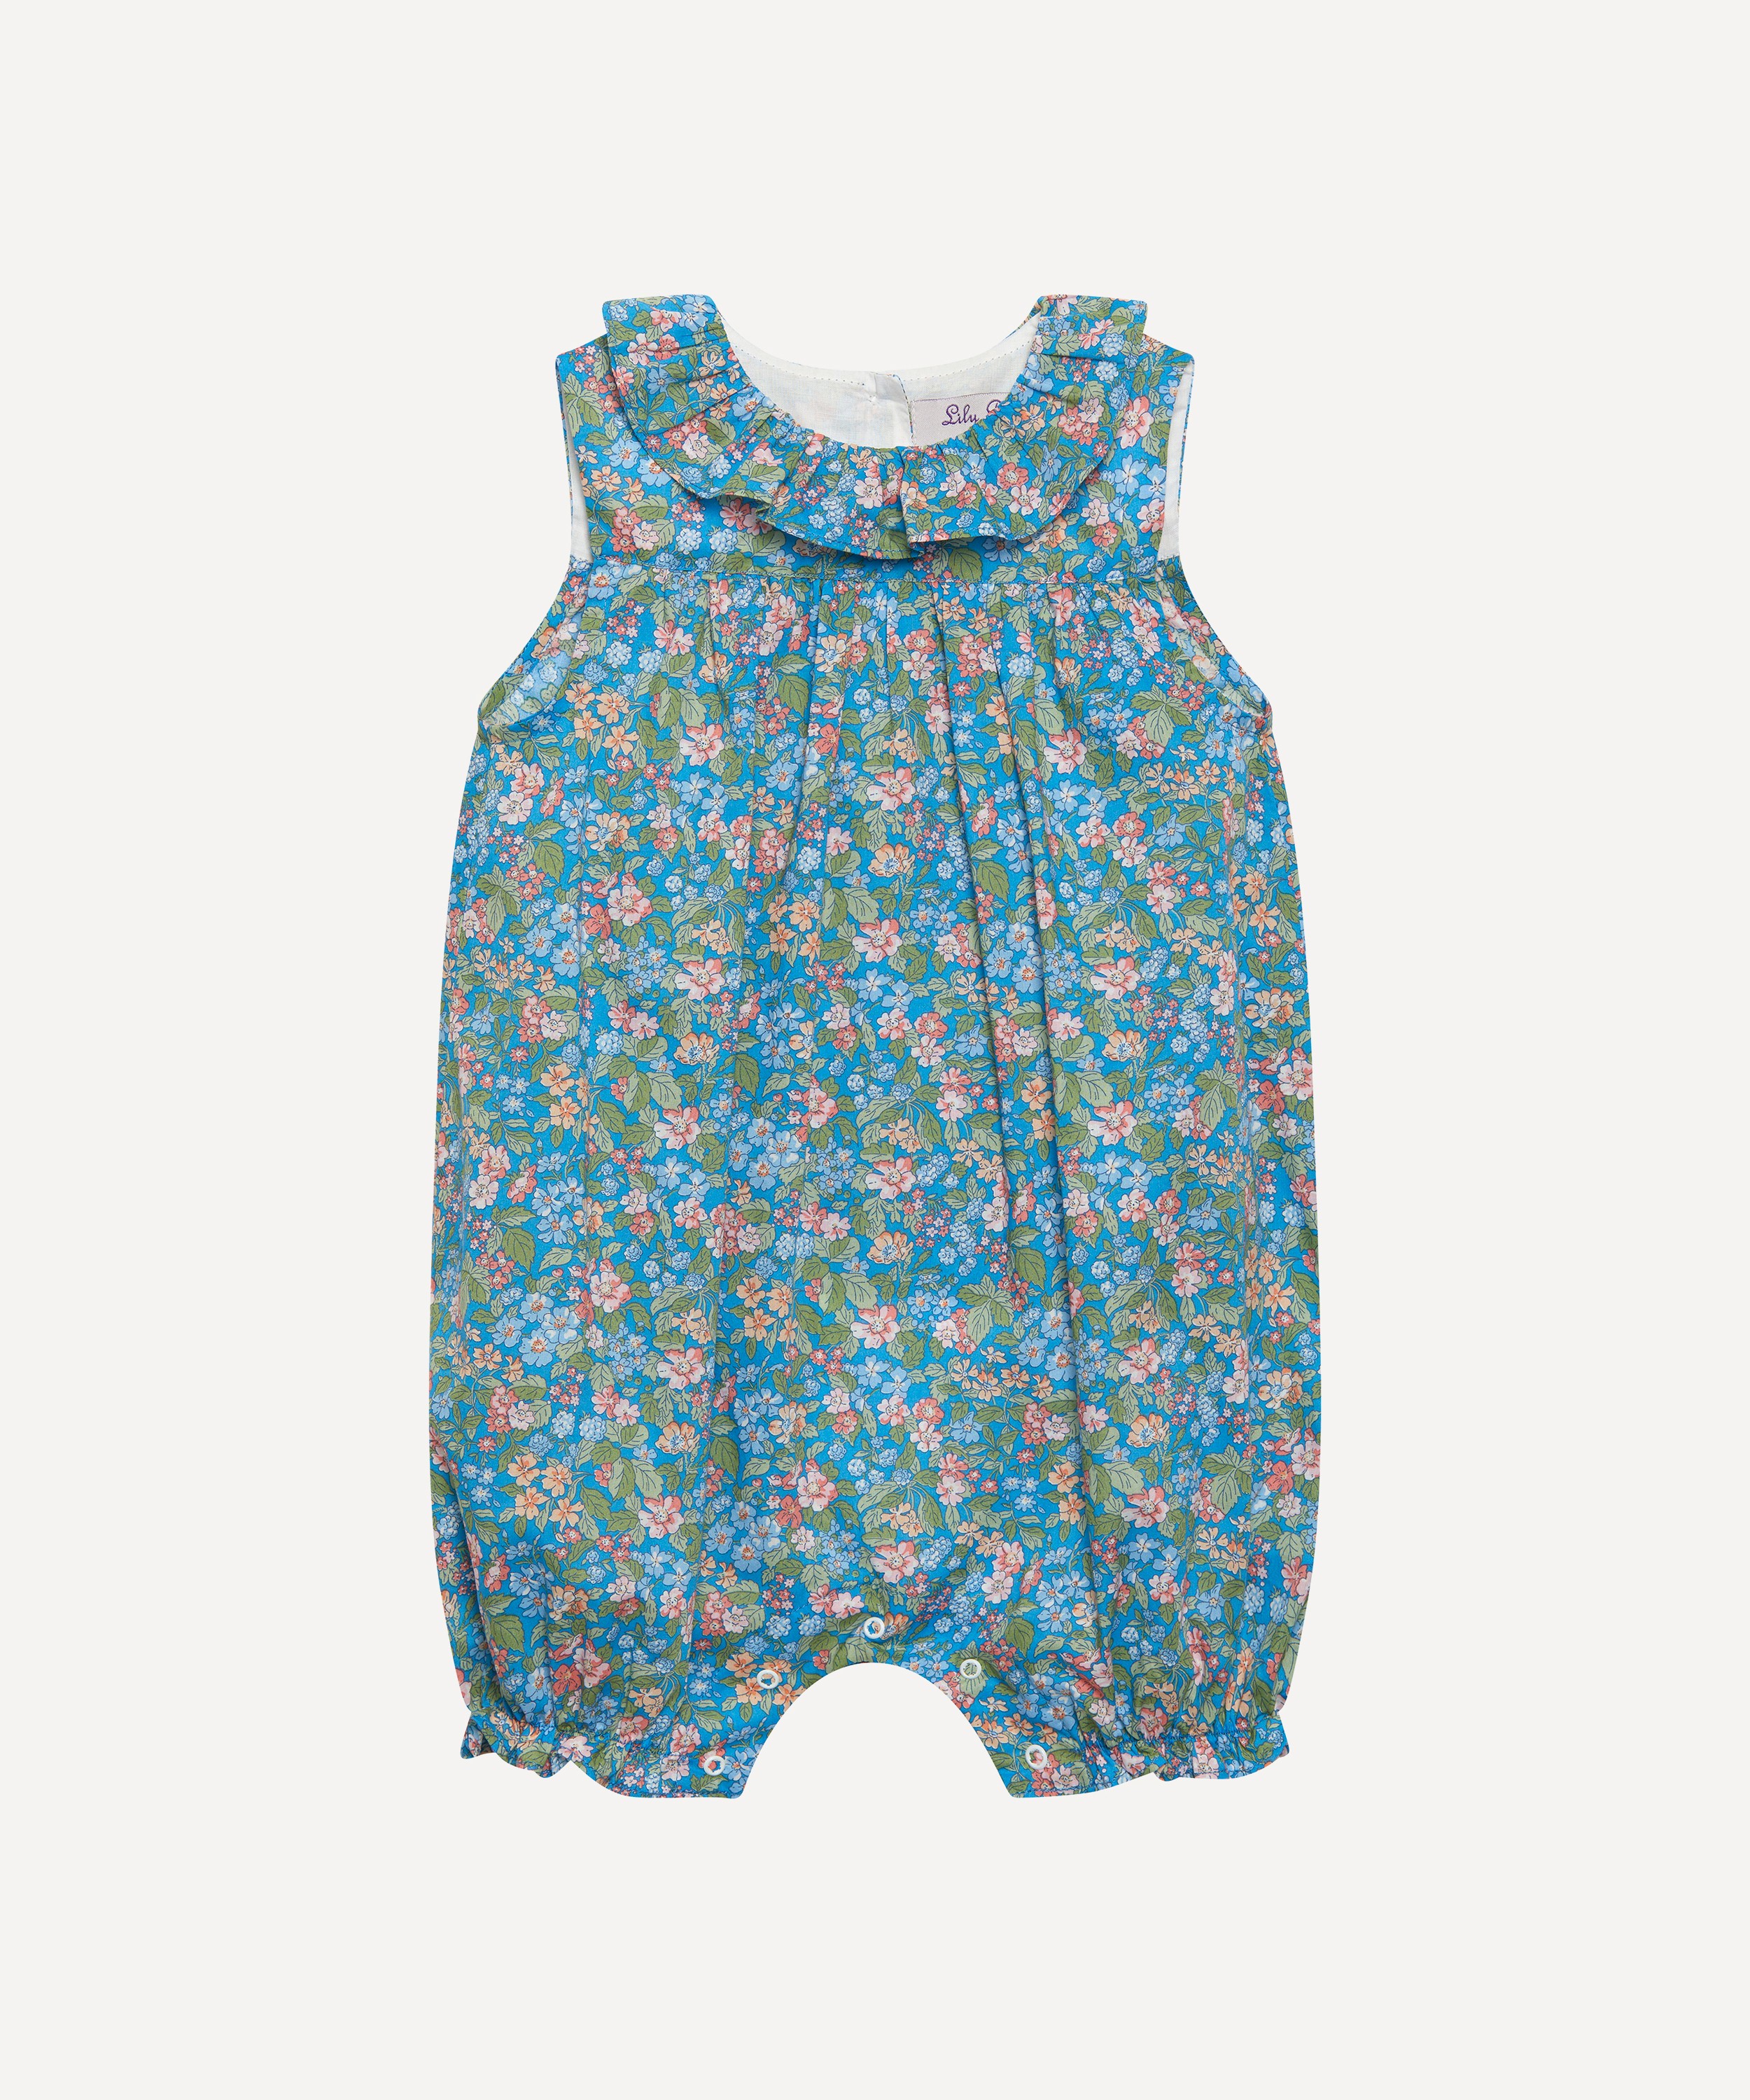 Trotters - Hedgerow Ramble Willow Romper 3-24 Months image number 0